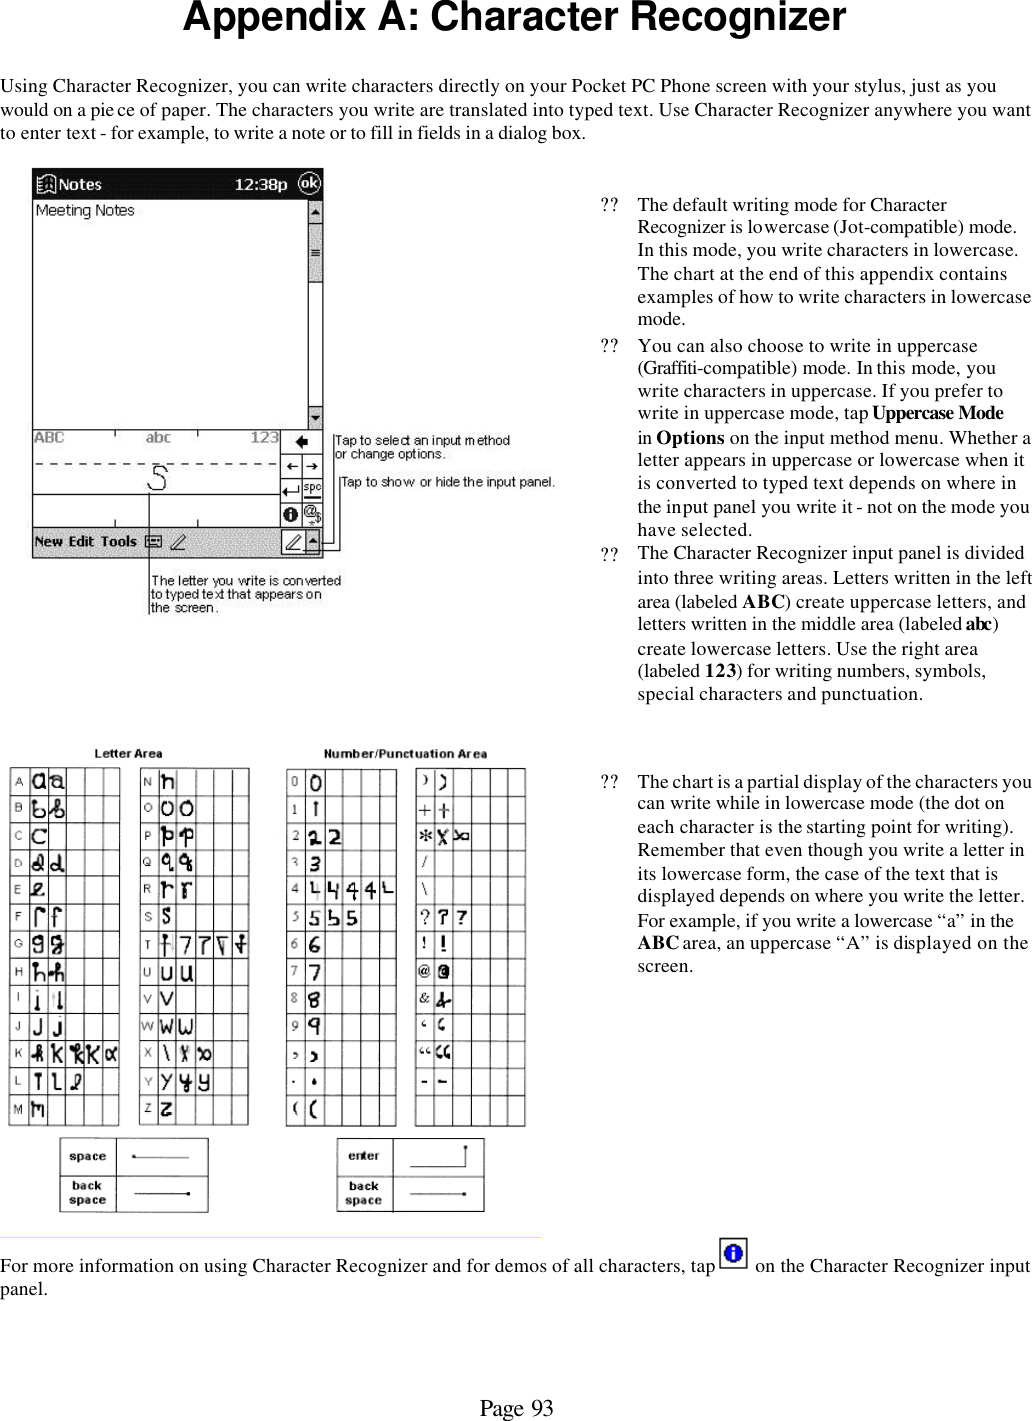 Page 93 Appendix A: Character Recognizer  Using Character Recognizer, you can write characters directly on your Pocket PC Phone screen with your stylus, just as you would on a pie ce of paper. The characters you write are translated into typed text. Use Character Recognizer anywhere you want to enter text - for example, to write a note or to fill in fields in a dialog box.     ?? The default writing mode for Character Recognizer is lowercase (Jot-compatible) mode. In this mode, you write characters in lowercase. The chart at the end of this appendix contains examples of how to write characters in lowercase mode.  ?? You can also choose to write in uppercase (Graffiti-compatible) mode. In this mode, you write characters in uppercase. If you prefer to write in uppercase mode, tap Uppercase Mode in Options on the input method menu. Whether a letter appears in uppercase or lowercase when it is converted to typed text depends on where in the input panel you write it - not on the mode you have selected. ?? The Character Recognizer input panel is divided into three writing areas. Letters written in the left area (labeled ABC) create uppercase letters, and letters written in the middle area (labeled abc) create lowercase letters. Use the right area (labeled 123) for writing numbers, symbols, special characters and punctuation.     ??The chart is a partial display of the characters you can write while in lowercase mode (the dot on each character is the starting point for writing). Remember that even though you write a letter in its lowercase form, the case of the text that is displayed depends on where you write the letter. For example, if you write a lowercase “a” in the ABC area, an uppercase “A” is displayed on the screen. For more information on using Character Recognizer and for demos of all characters, tap   on the Character Recognizer input panel.      